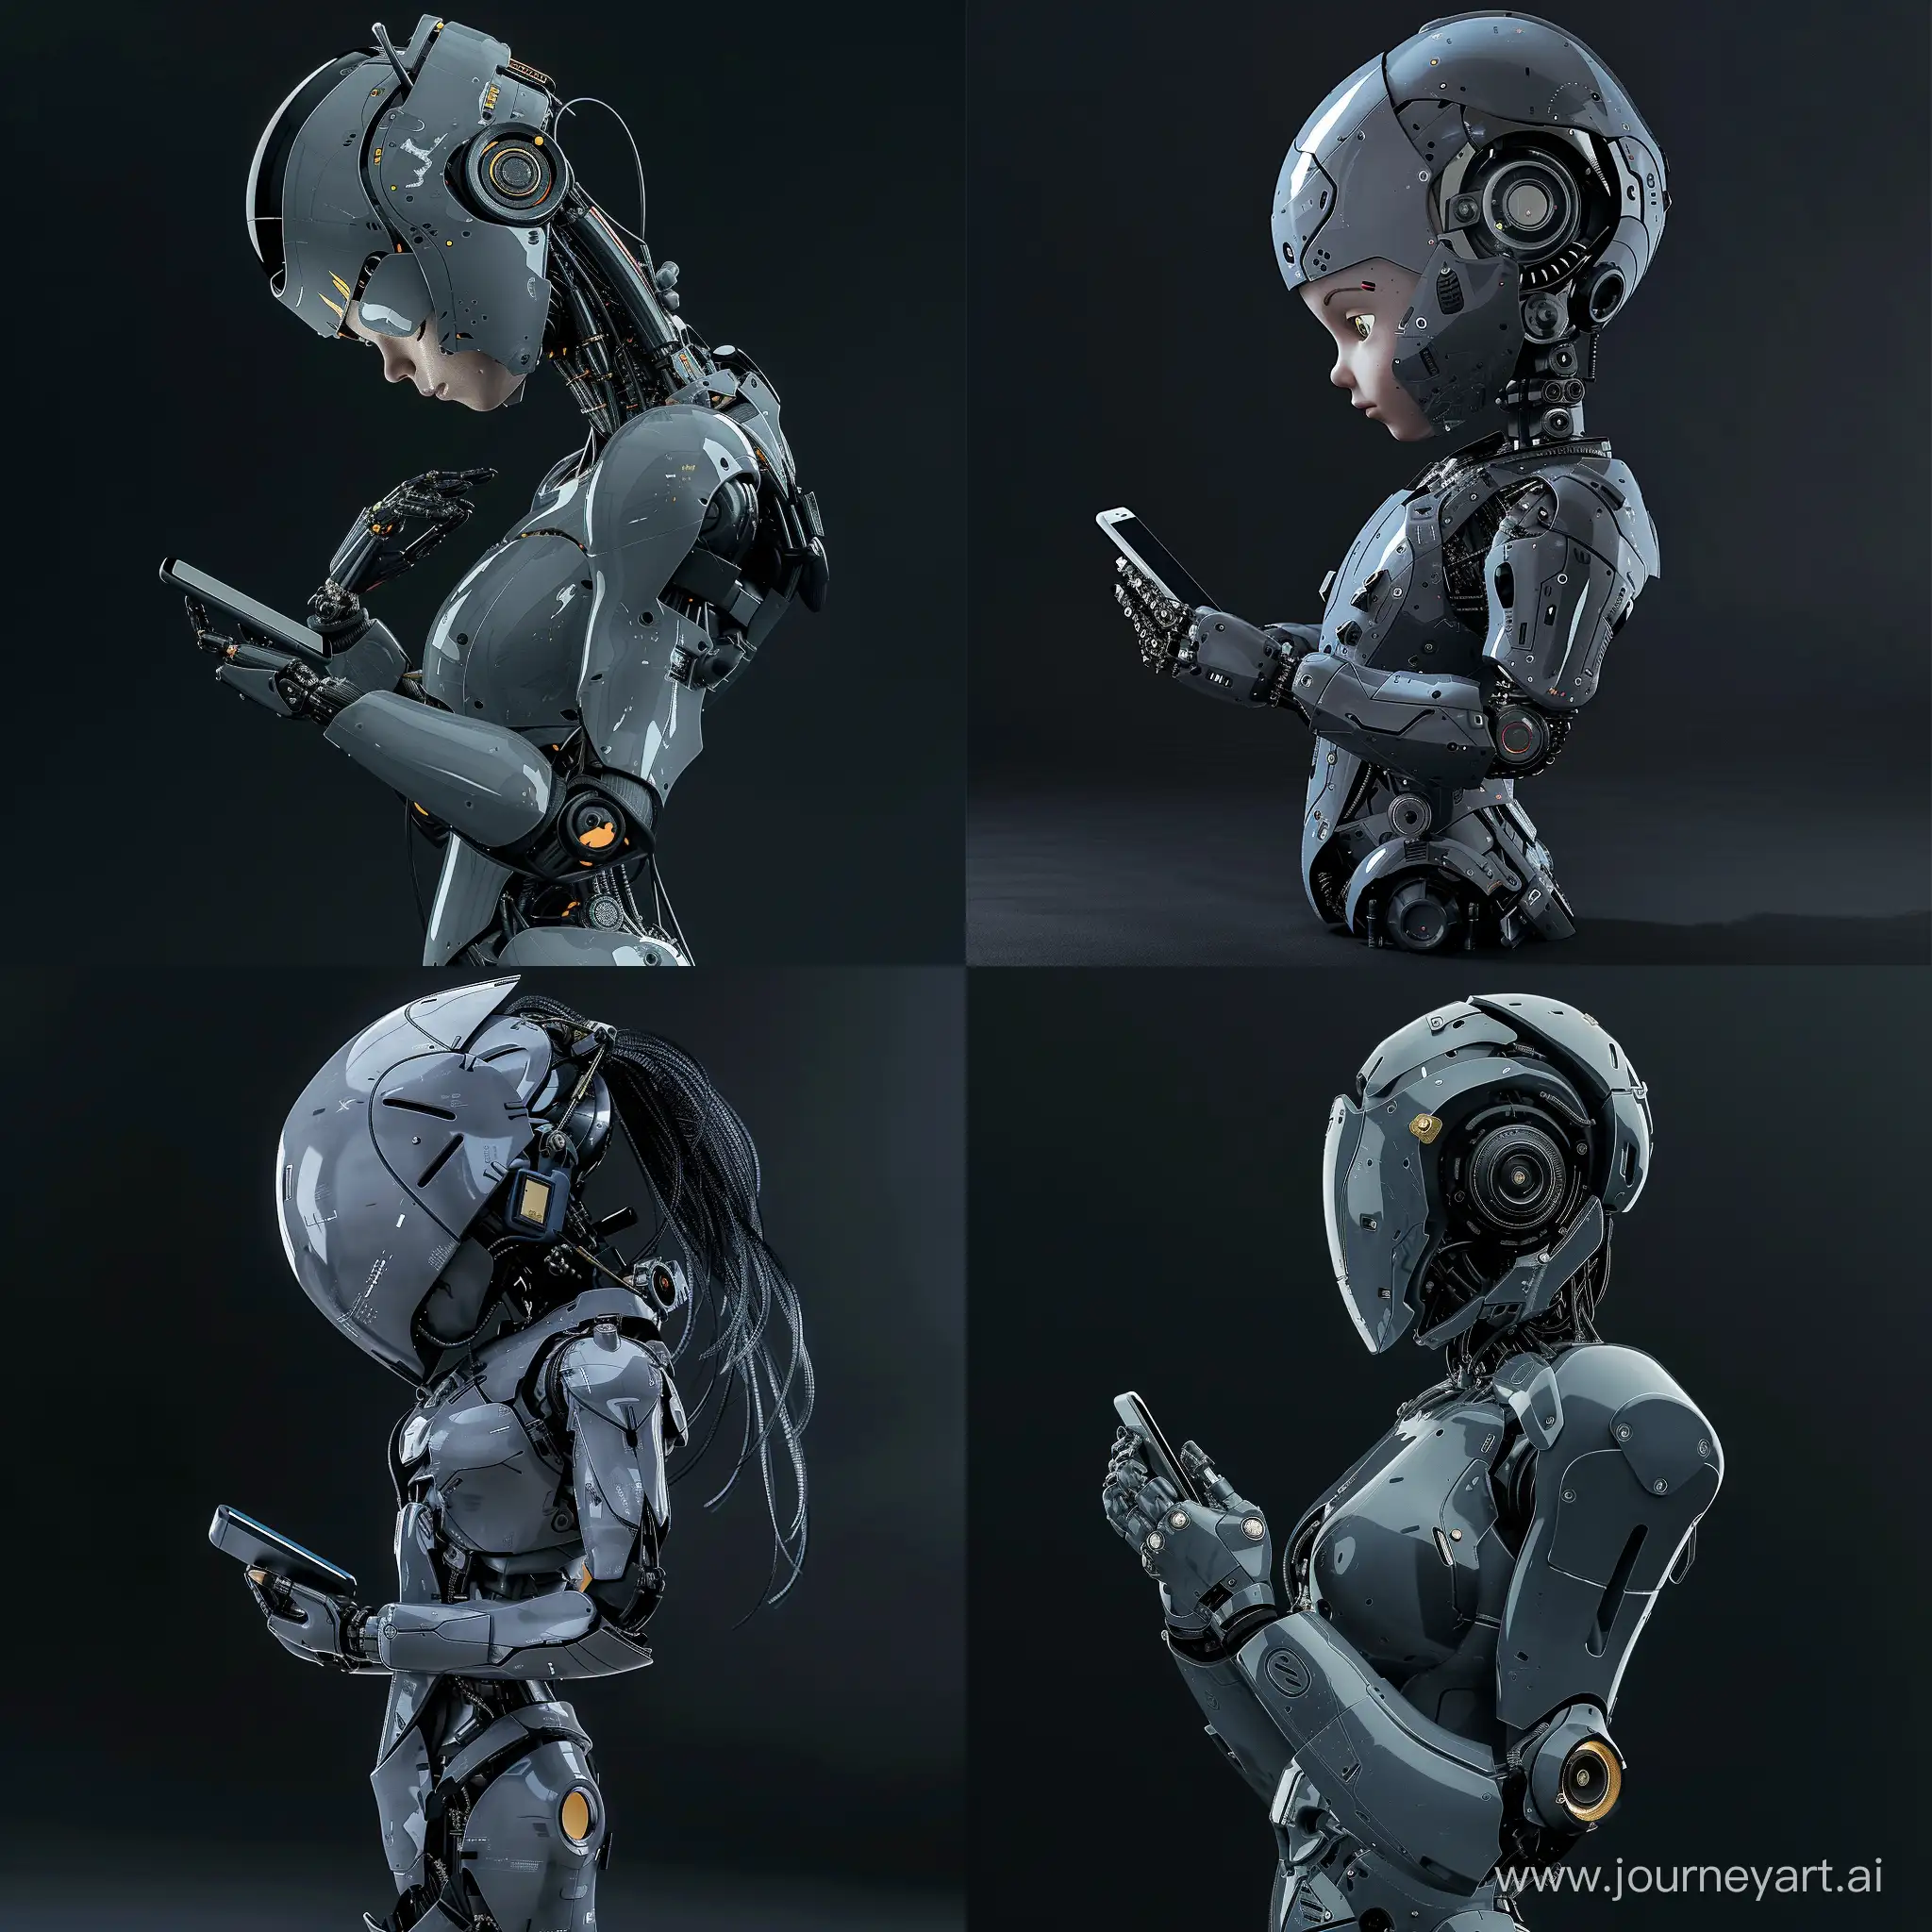 Adorable-Female-Robot-with-Smartphone-in-Cyberpunk-Style